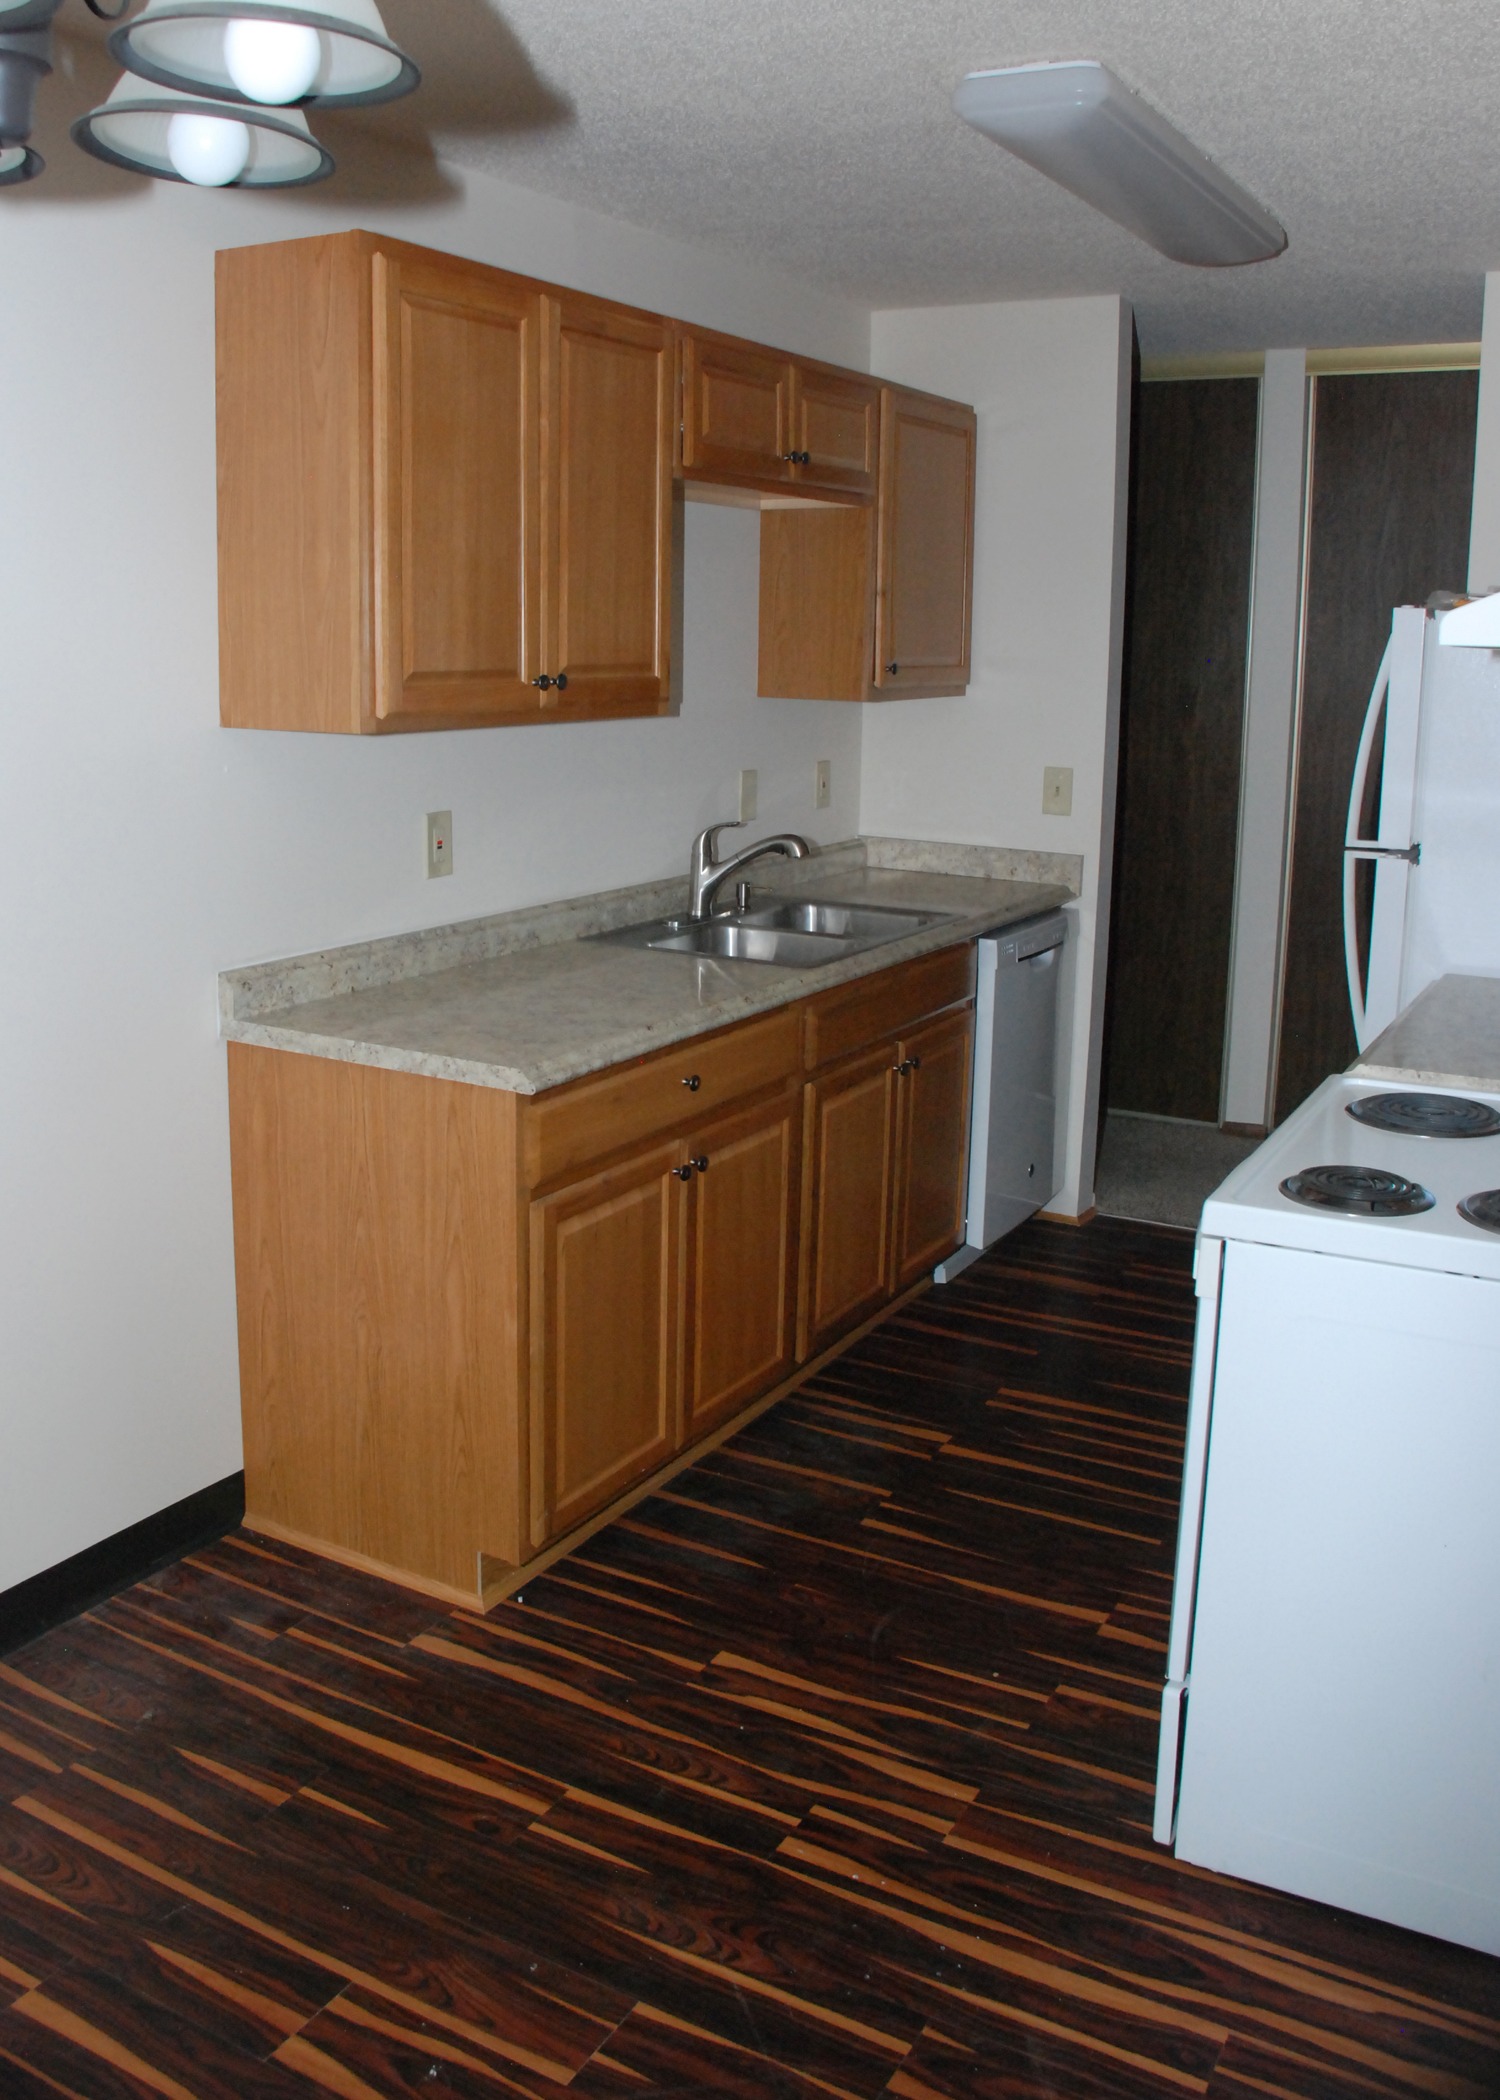 Kitchen inside Rent with Olivers rental units